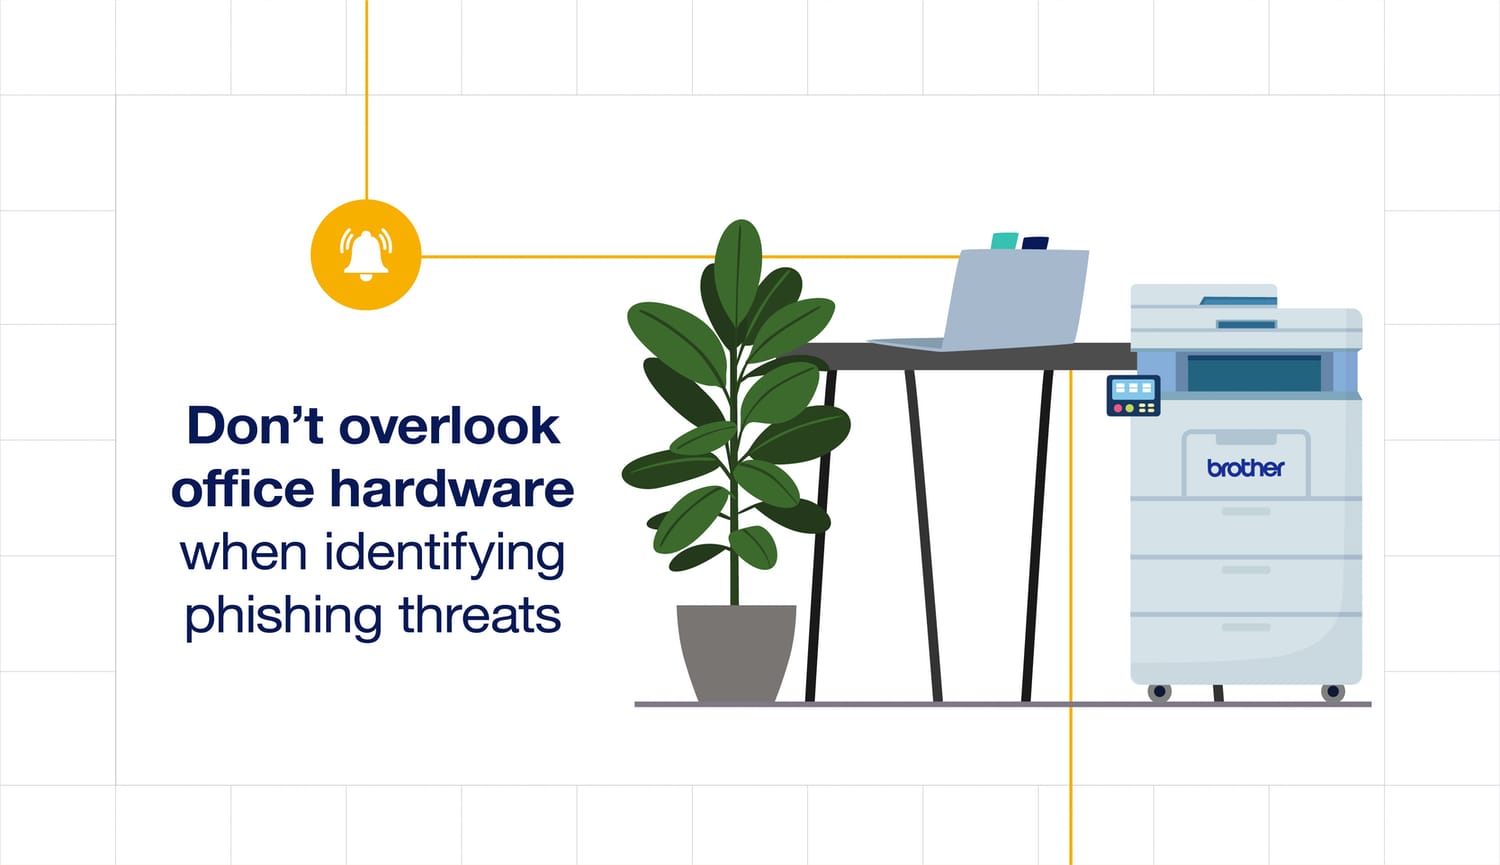 Illustration depicting why you shouldn't overlook office hardware when identifying phishing threats